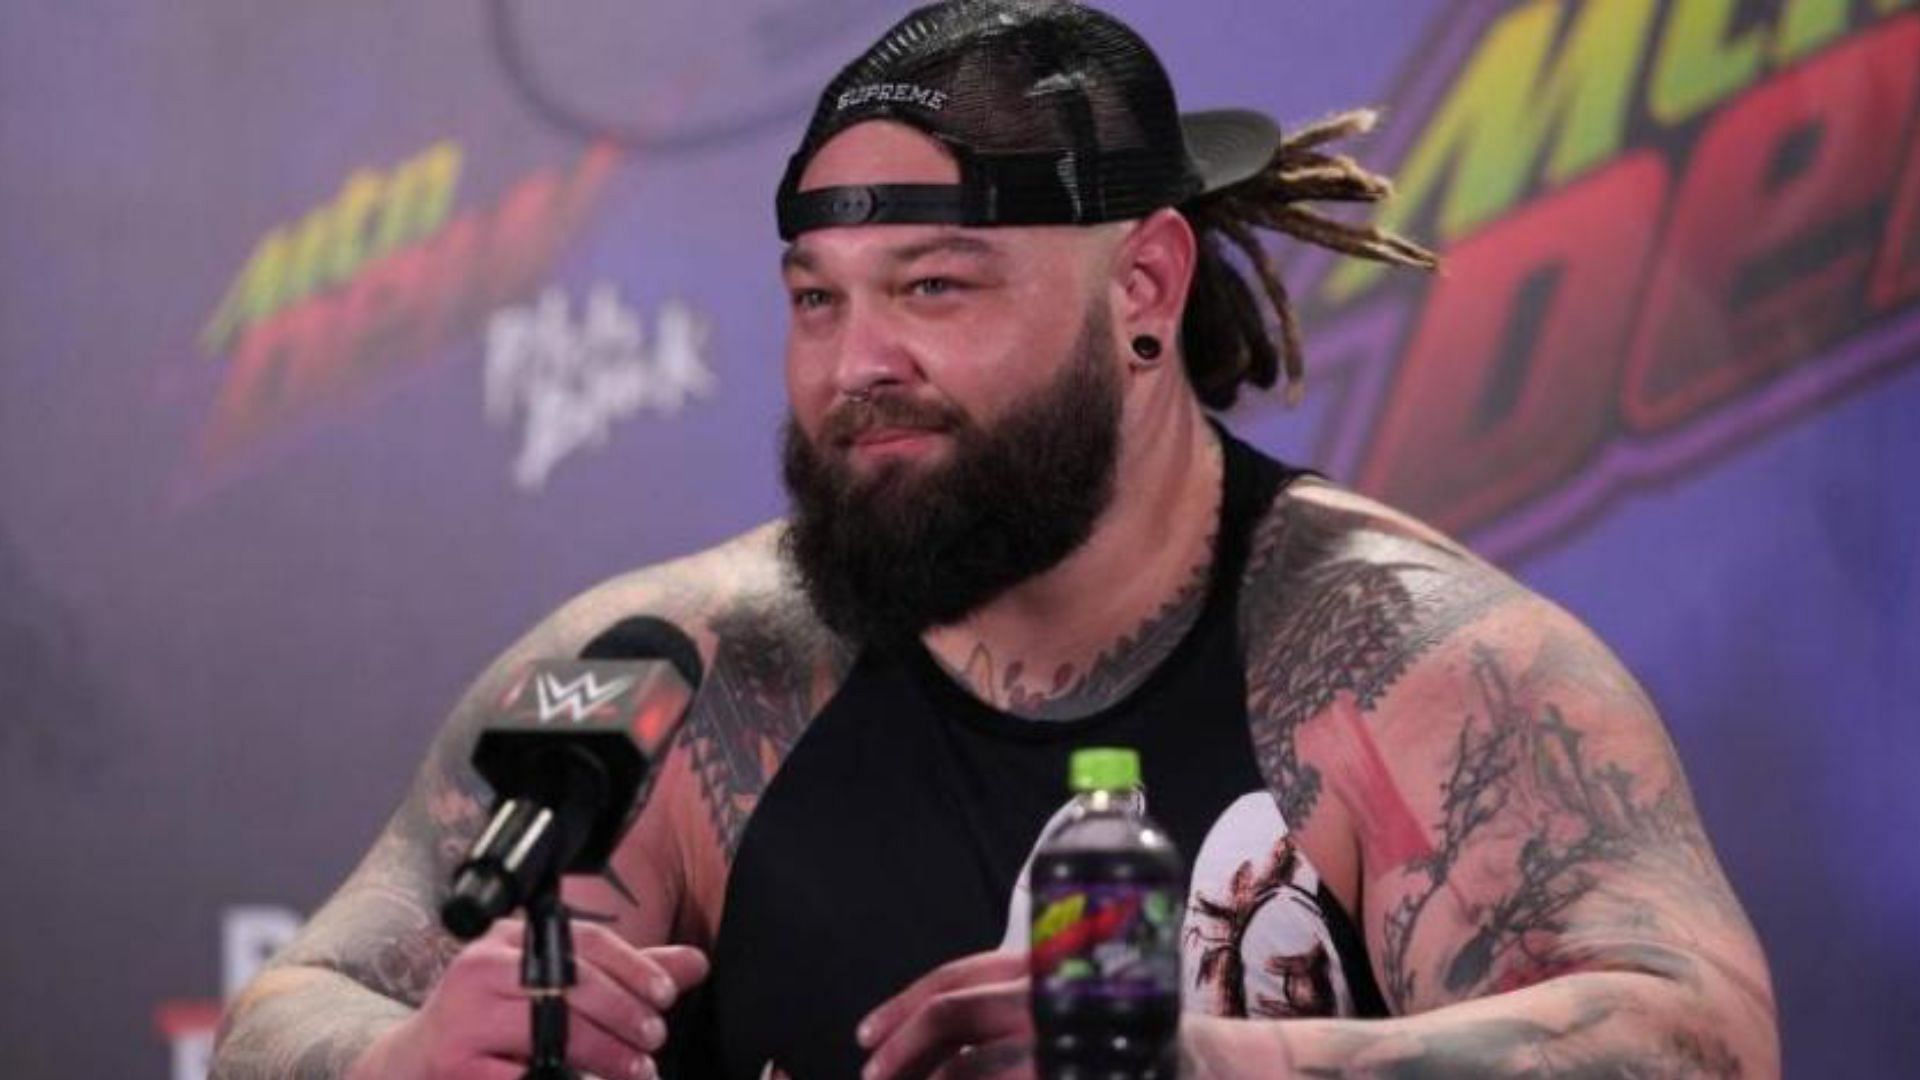 Bray Wyatt during a press conference. Image Credits: X